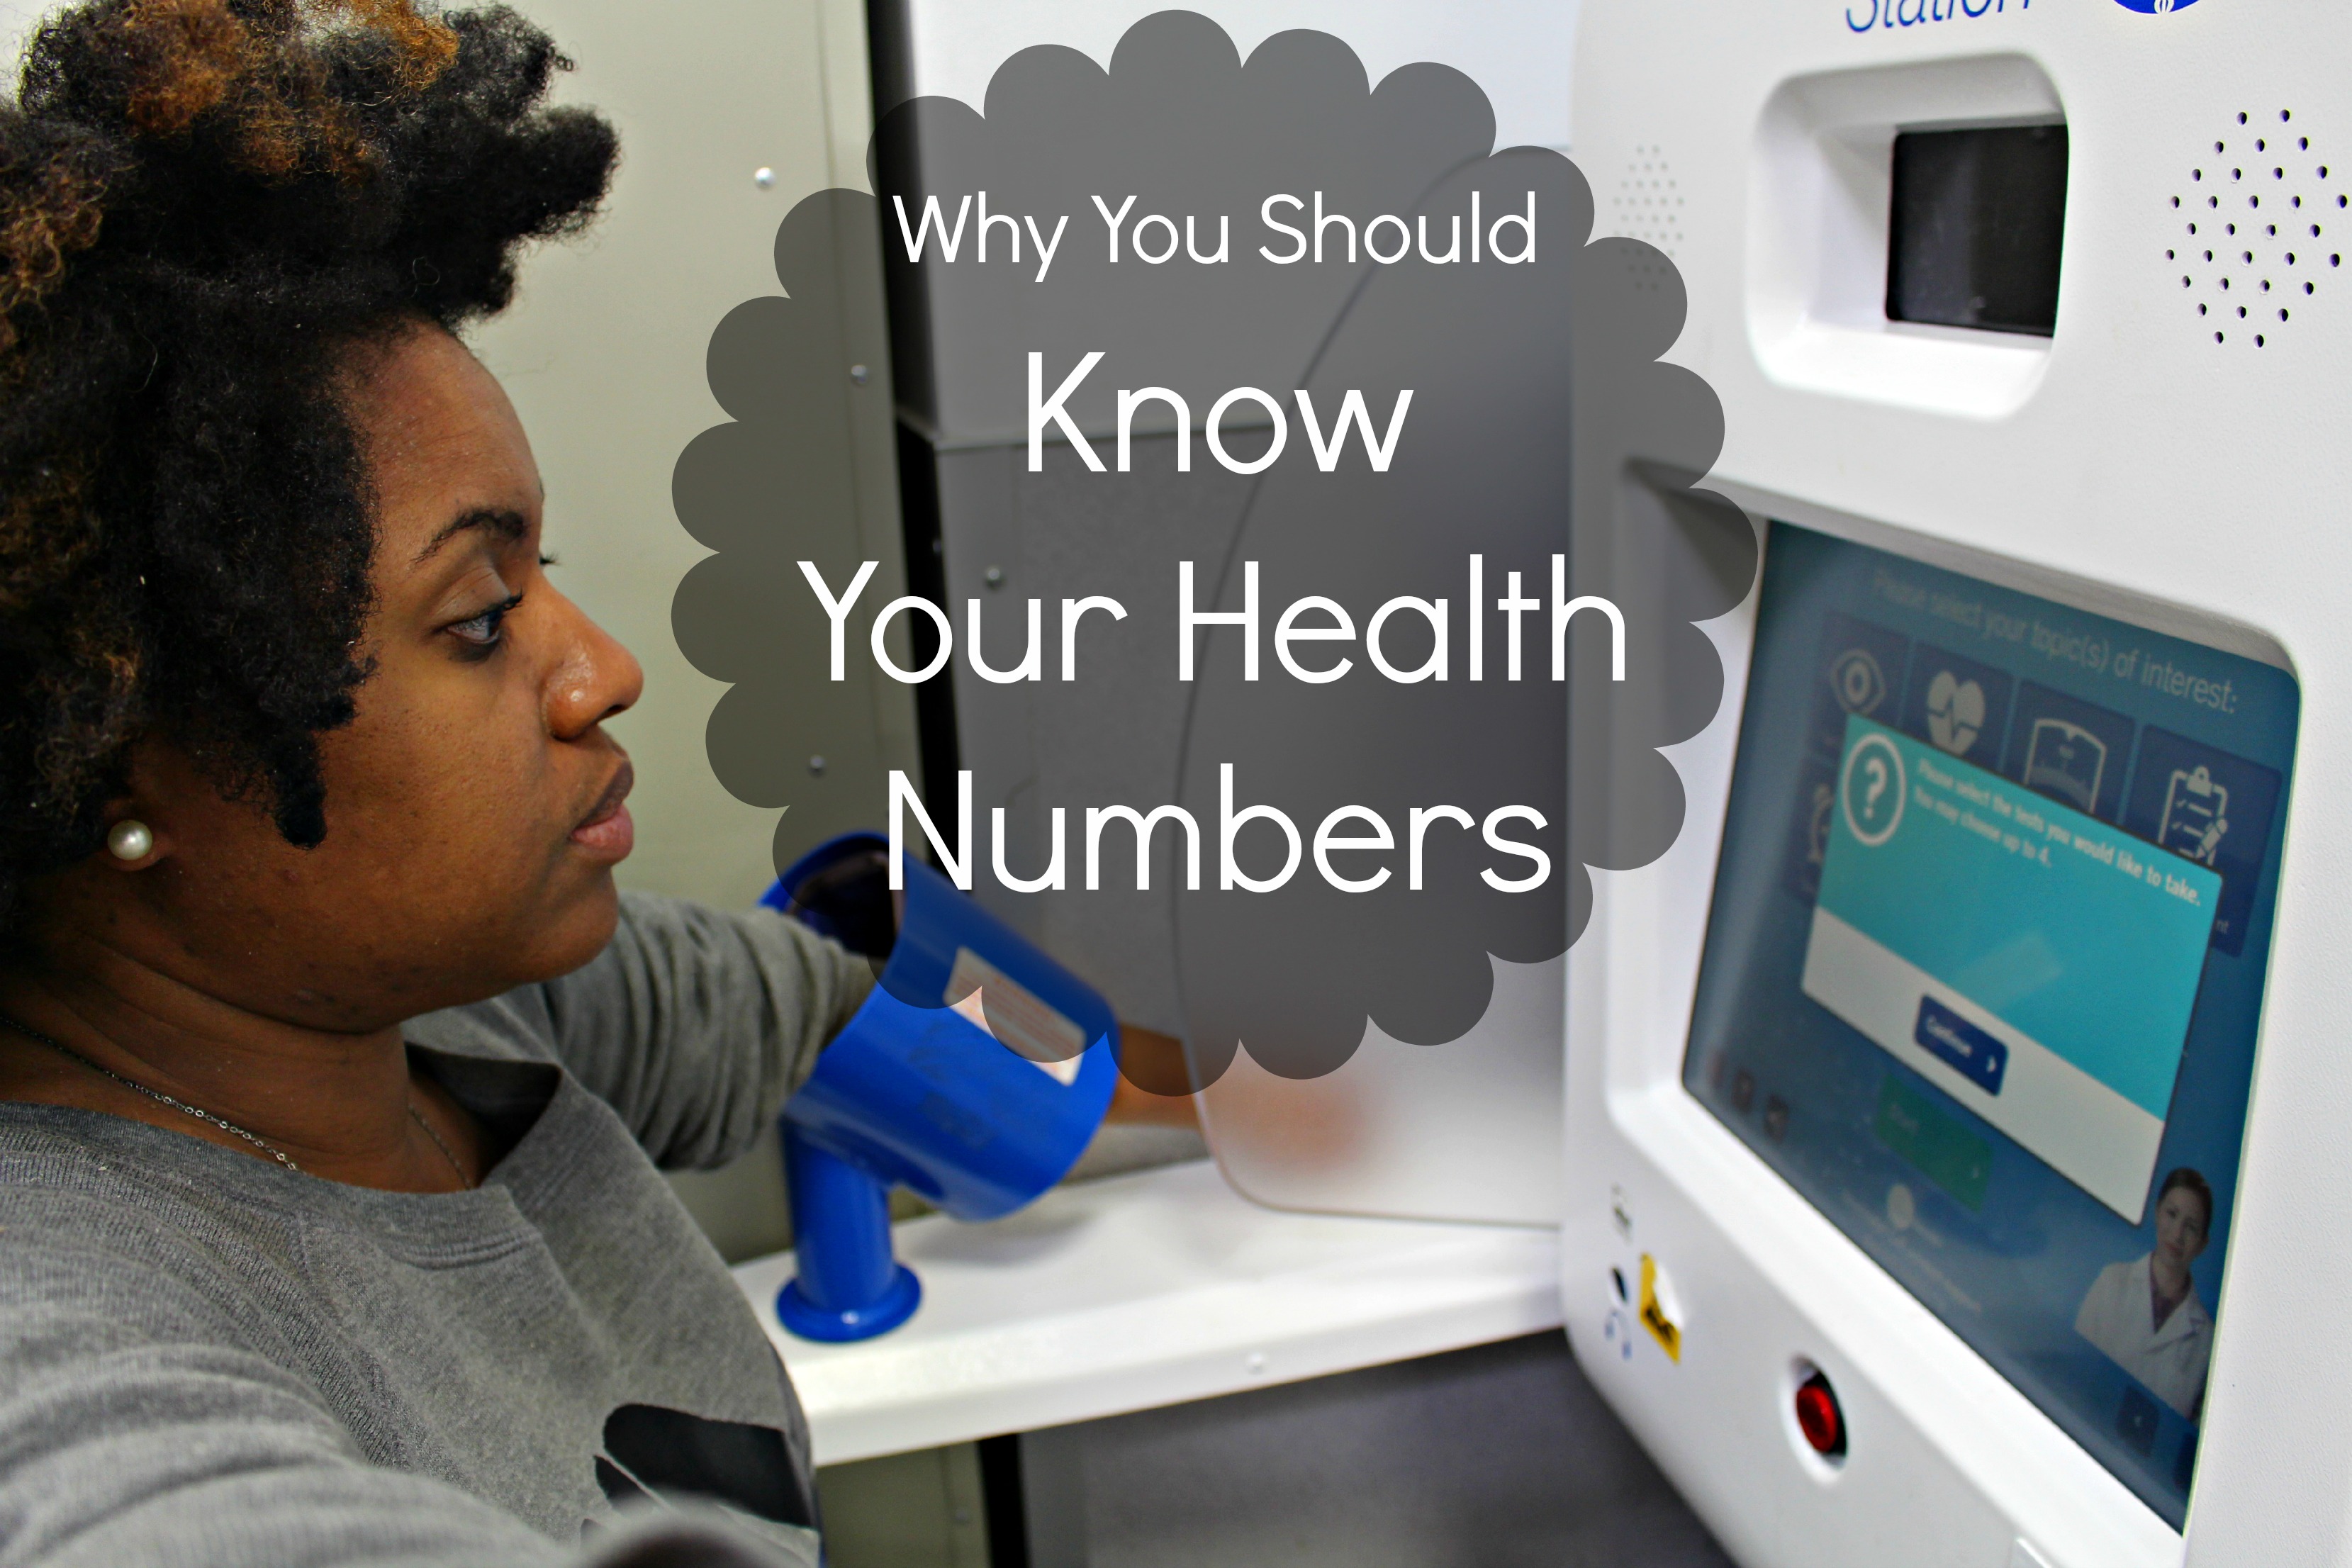 Why You Should Know Your Health Numbers